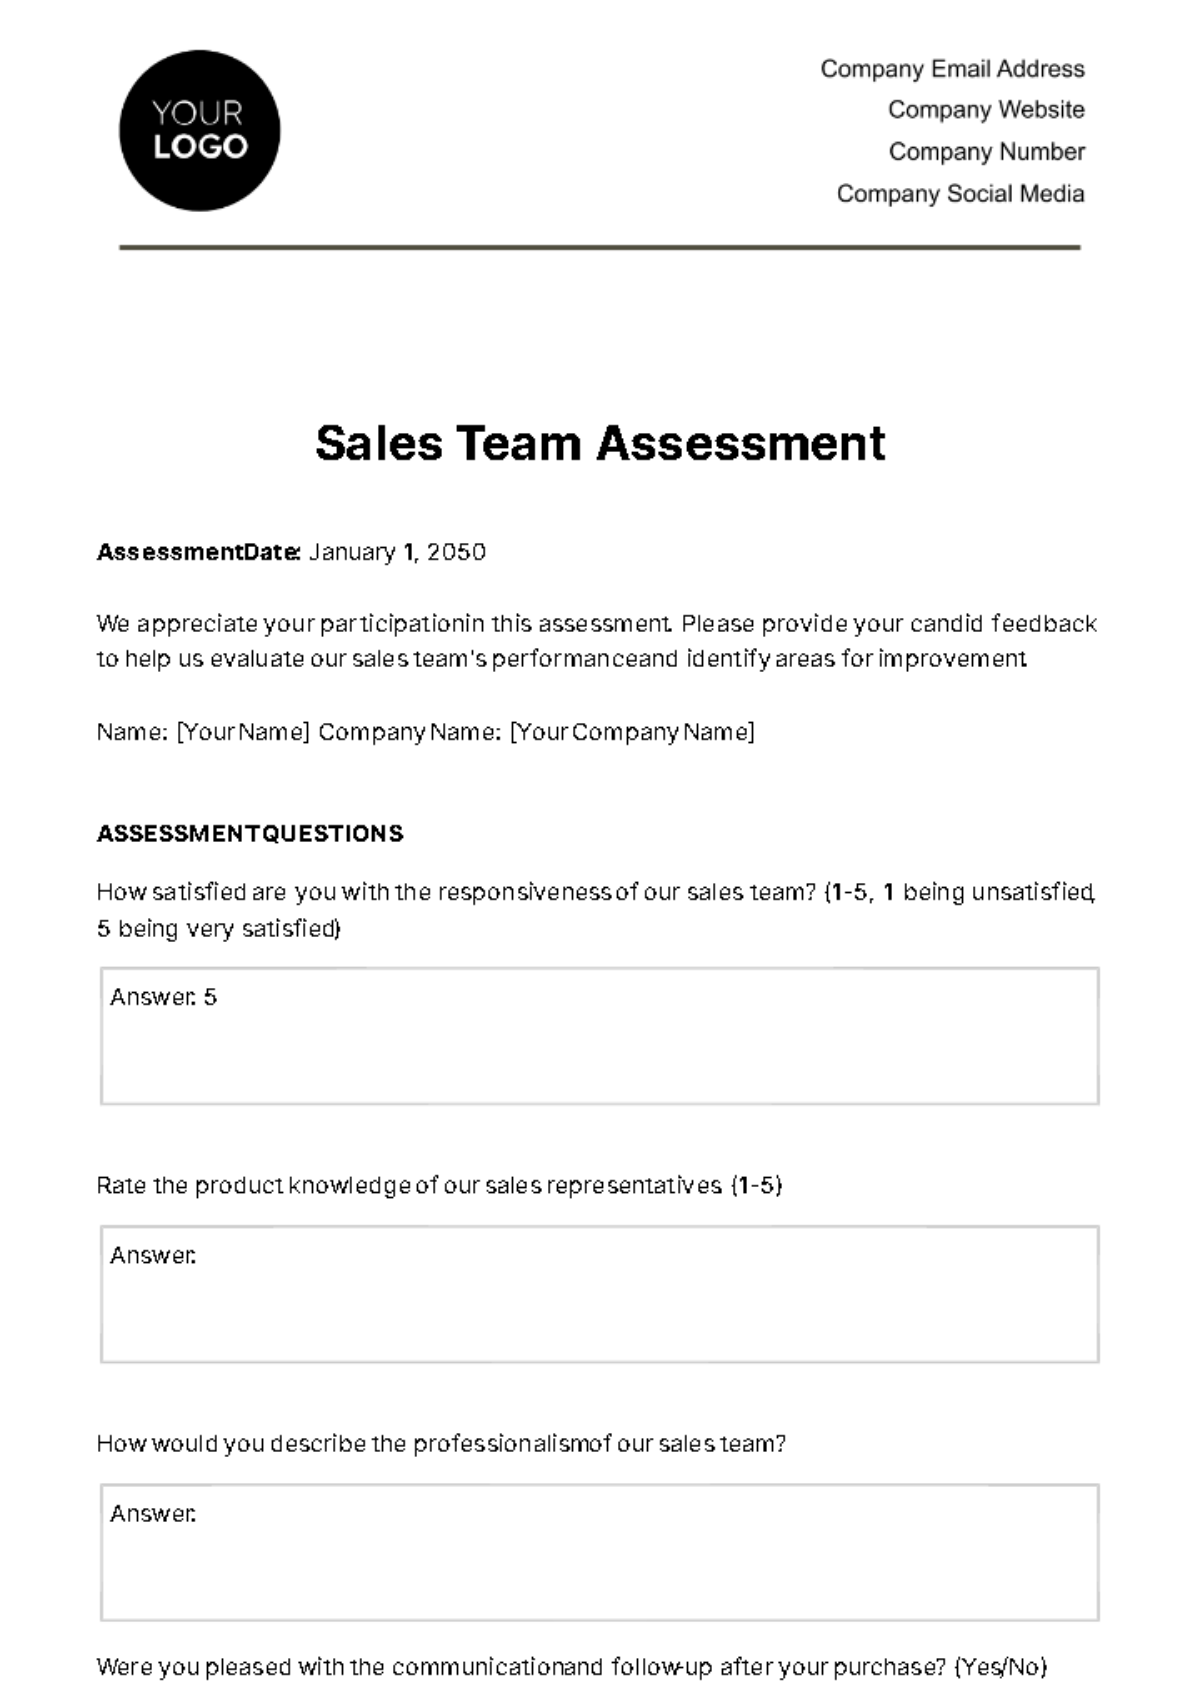 Free Sales Team Assessment Template